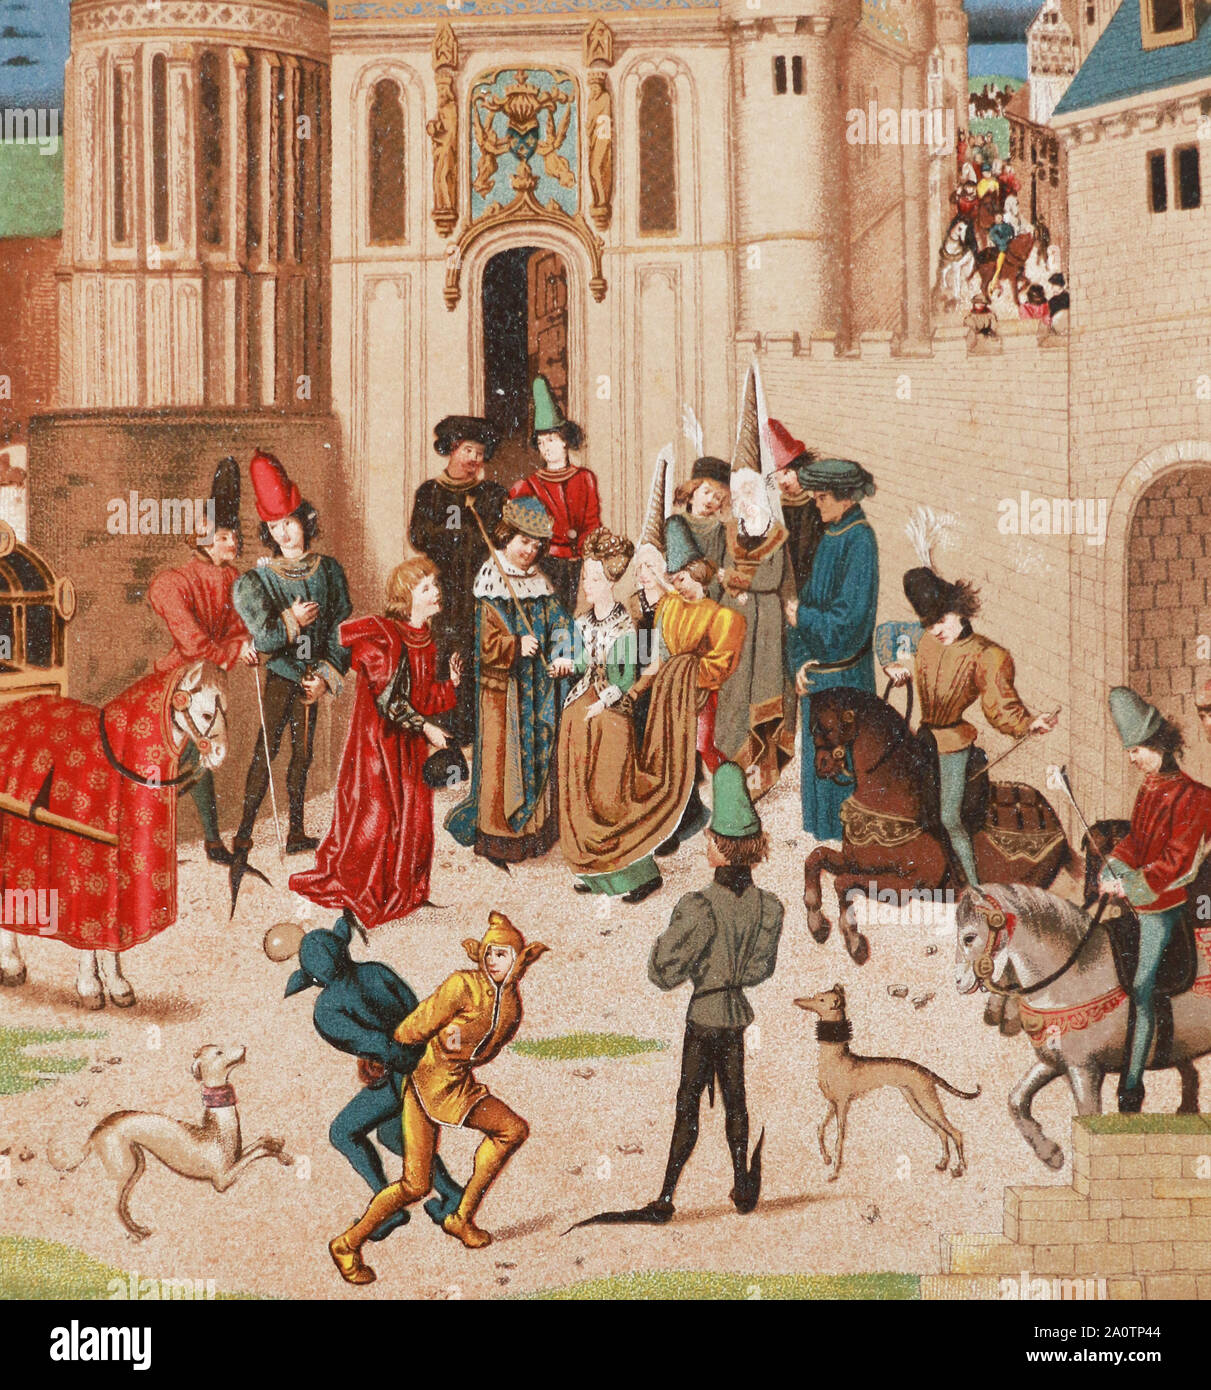 Arrival of the Queen of France in Paris. Medieval miniature. Stock Photo